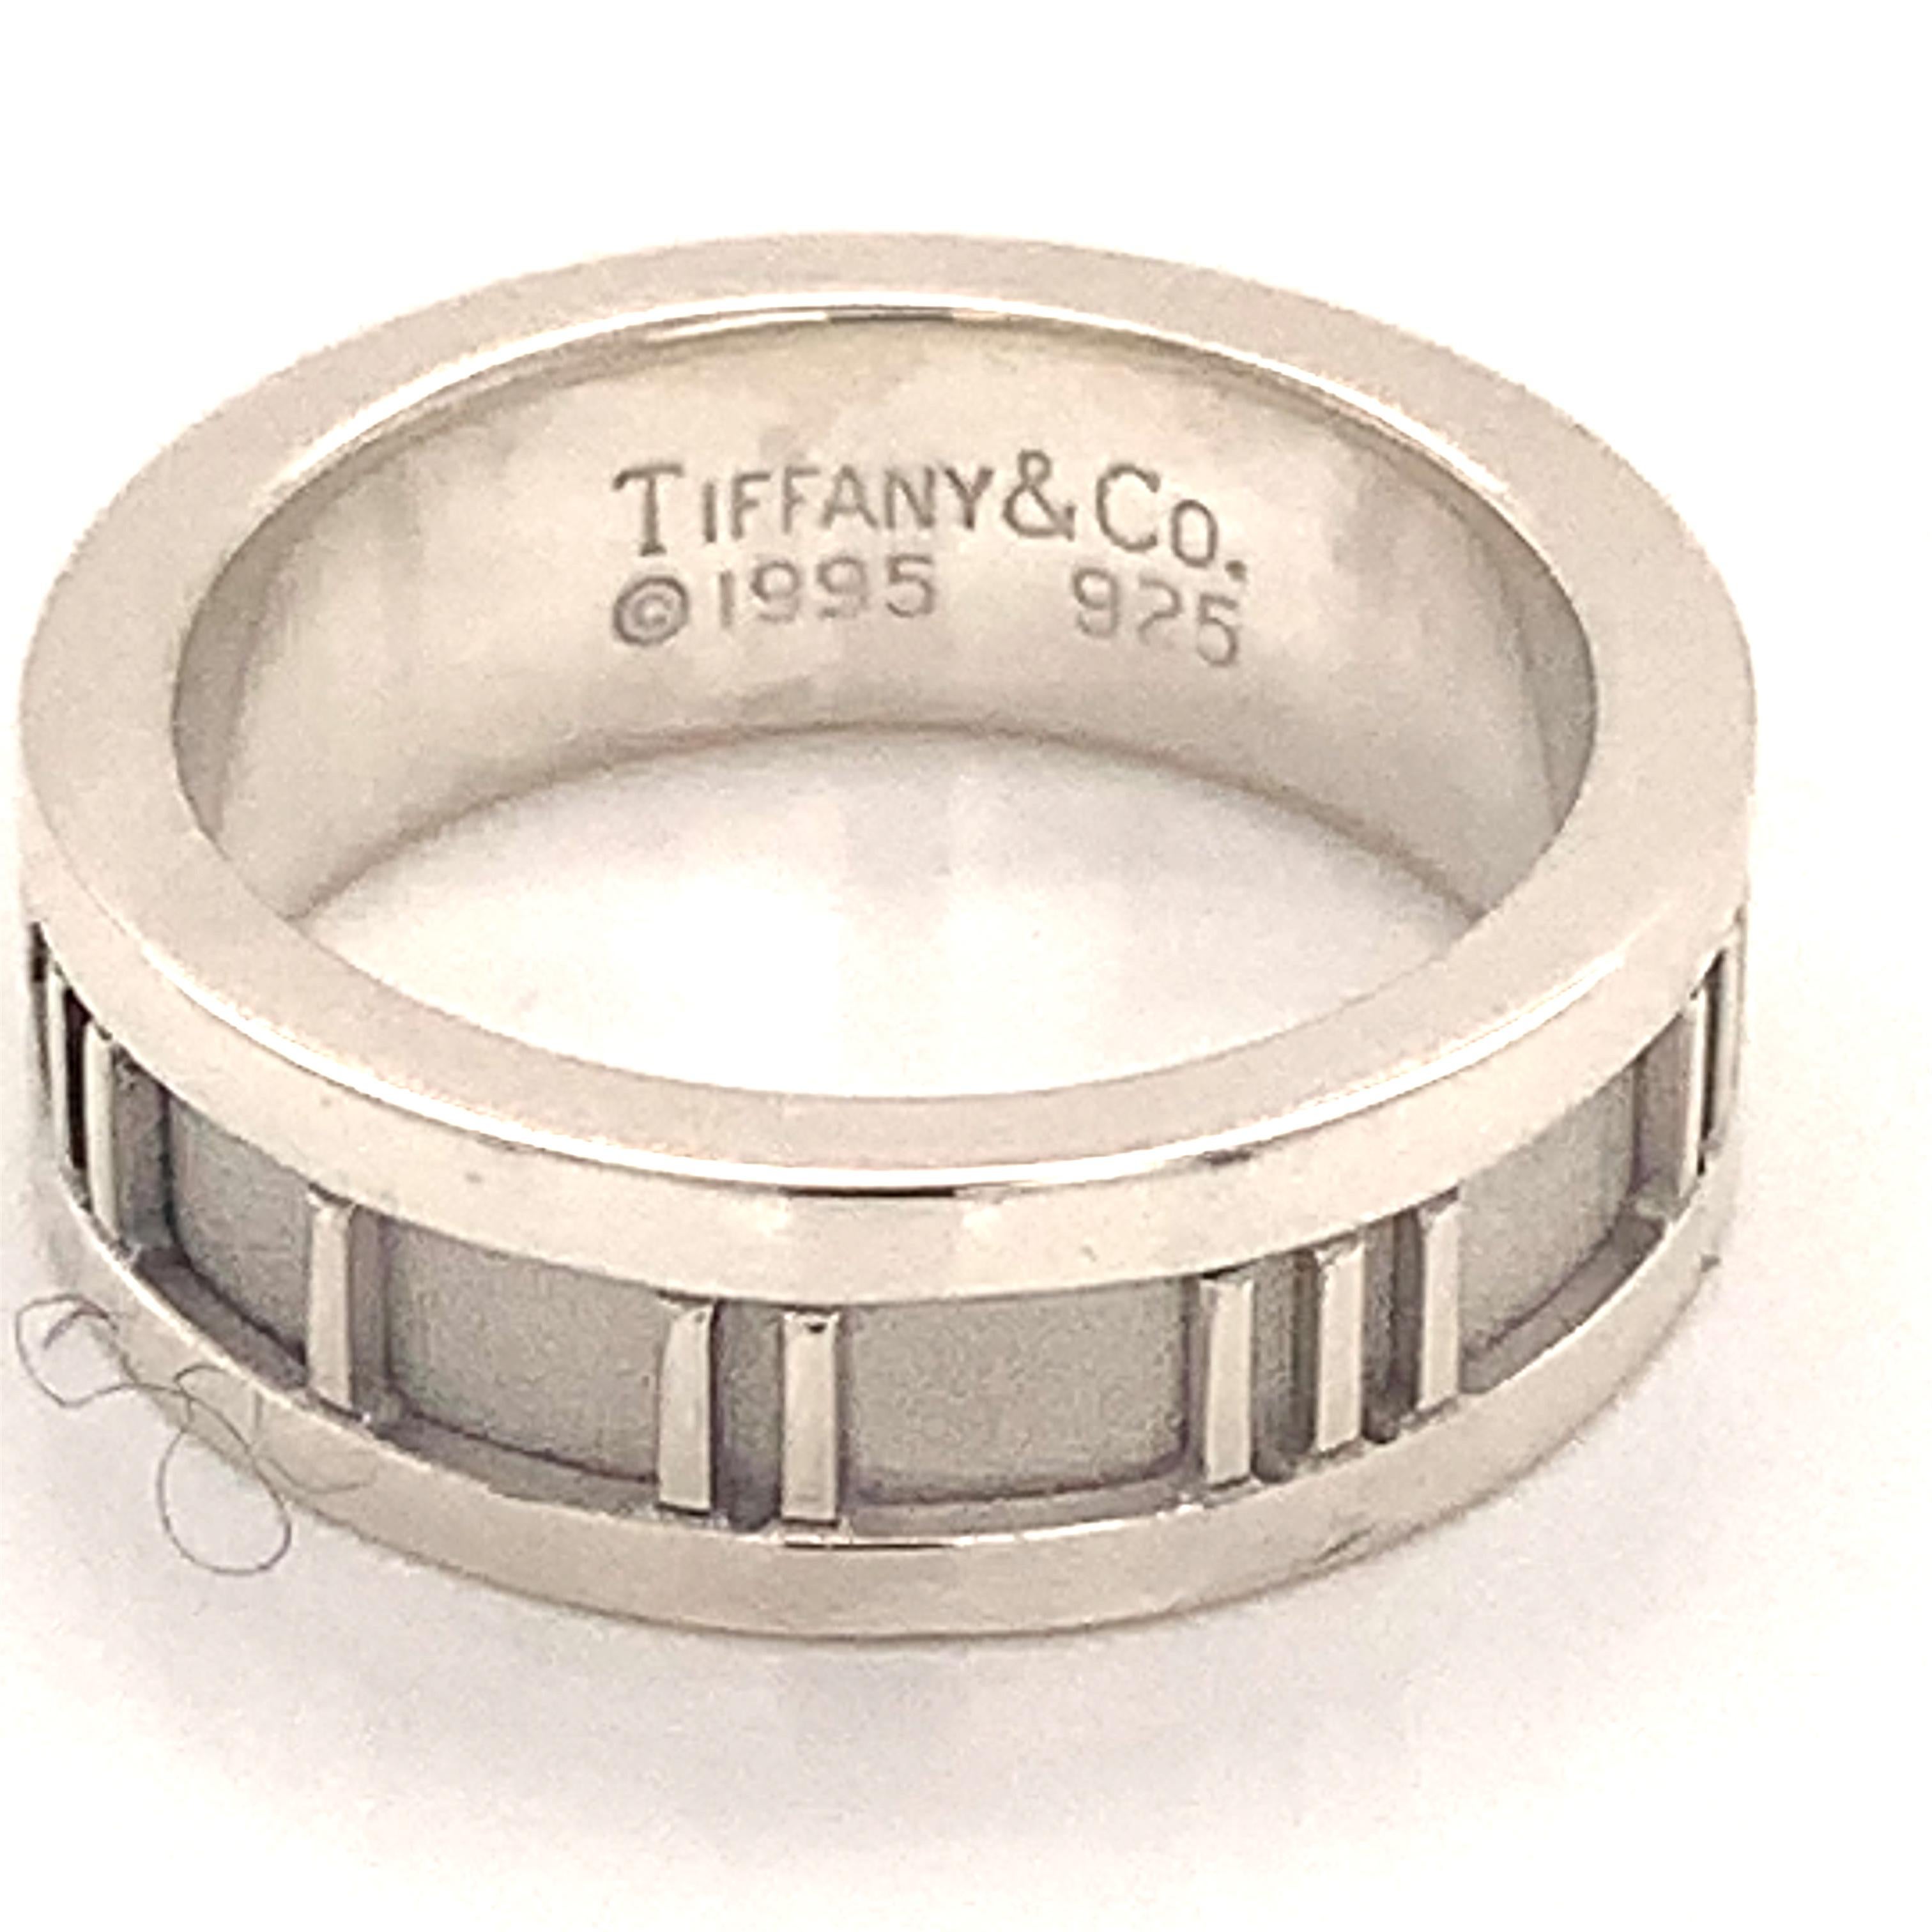 Tiffany & Co Estate Sterling Silver Ring Size 4.75, 5.63 Grams 5 mm Height TIF138
 
This elegant Authentic Tiffany & Co ring is made of sterling silver and has a weight of 5.63 grams.

TRUSTED SELLER SINCE 2002
 
PLEASE SEE OUR HUNDREDS OF POSITIVE